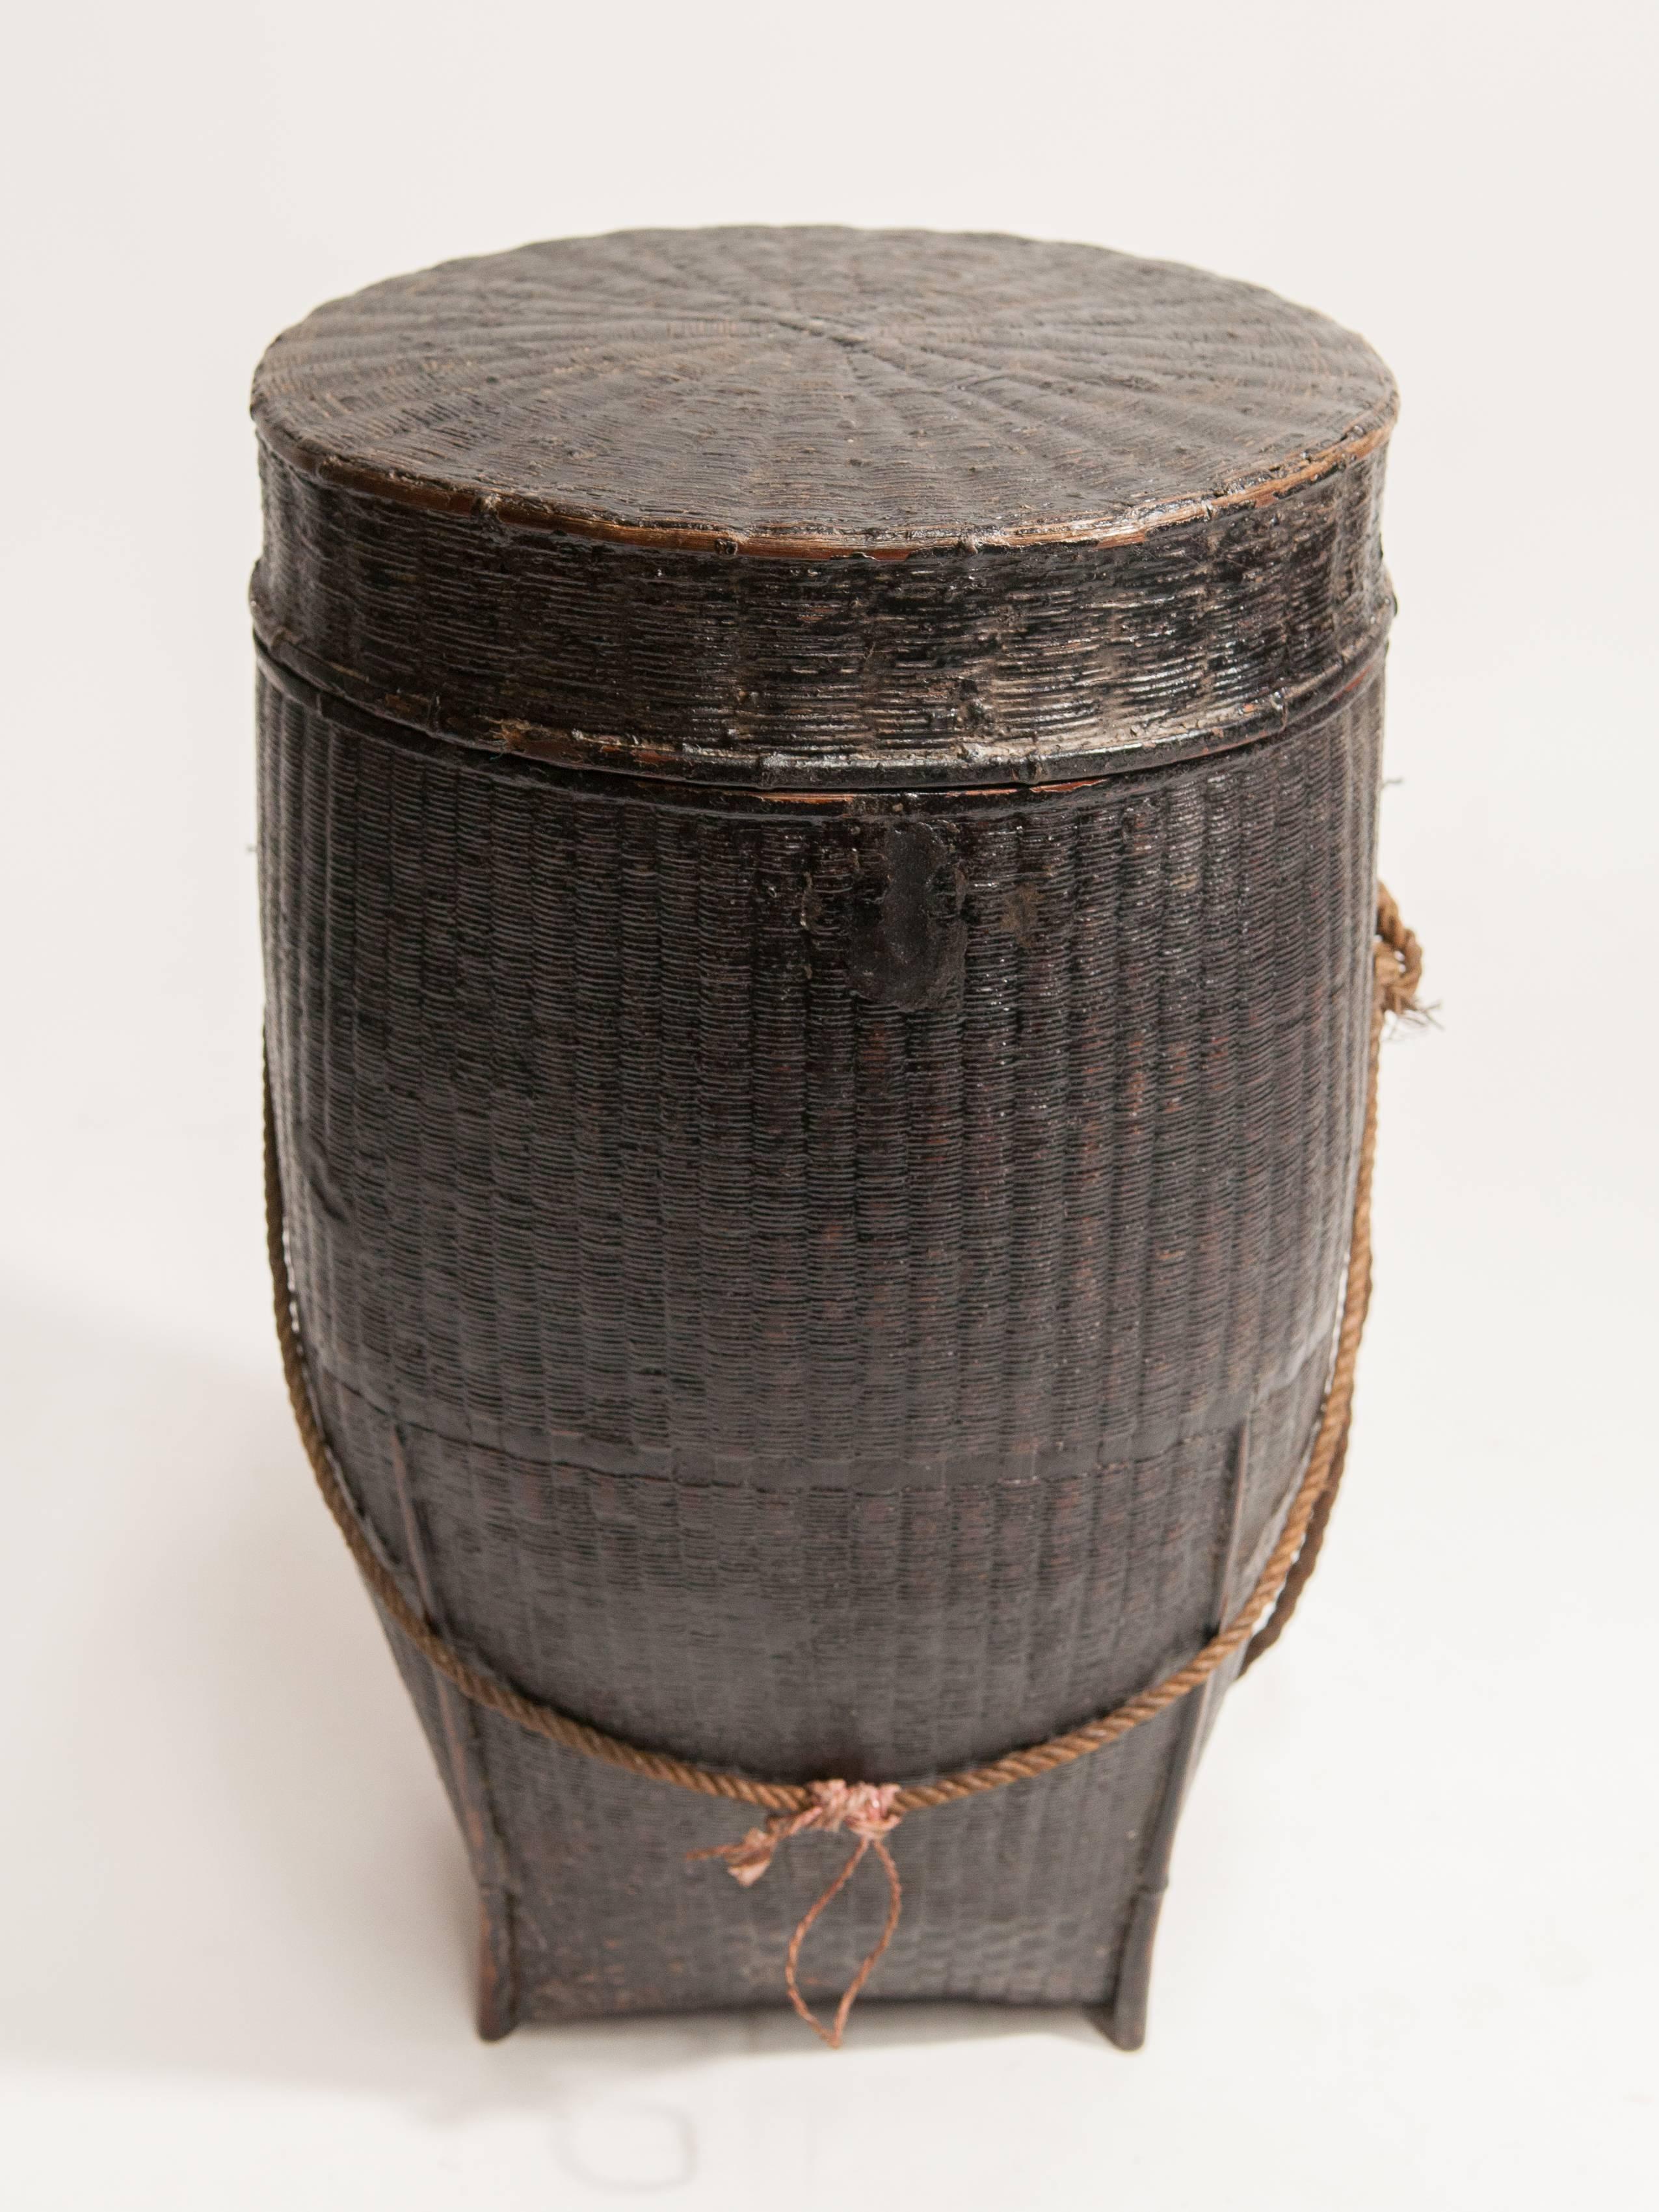 Tribal bamboo storage basket with Lid. Lacquered. From the Karen people of Burma. Mid-20th century.
Dimensions: 9.5